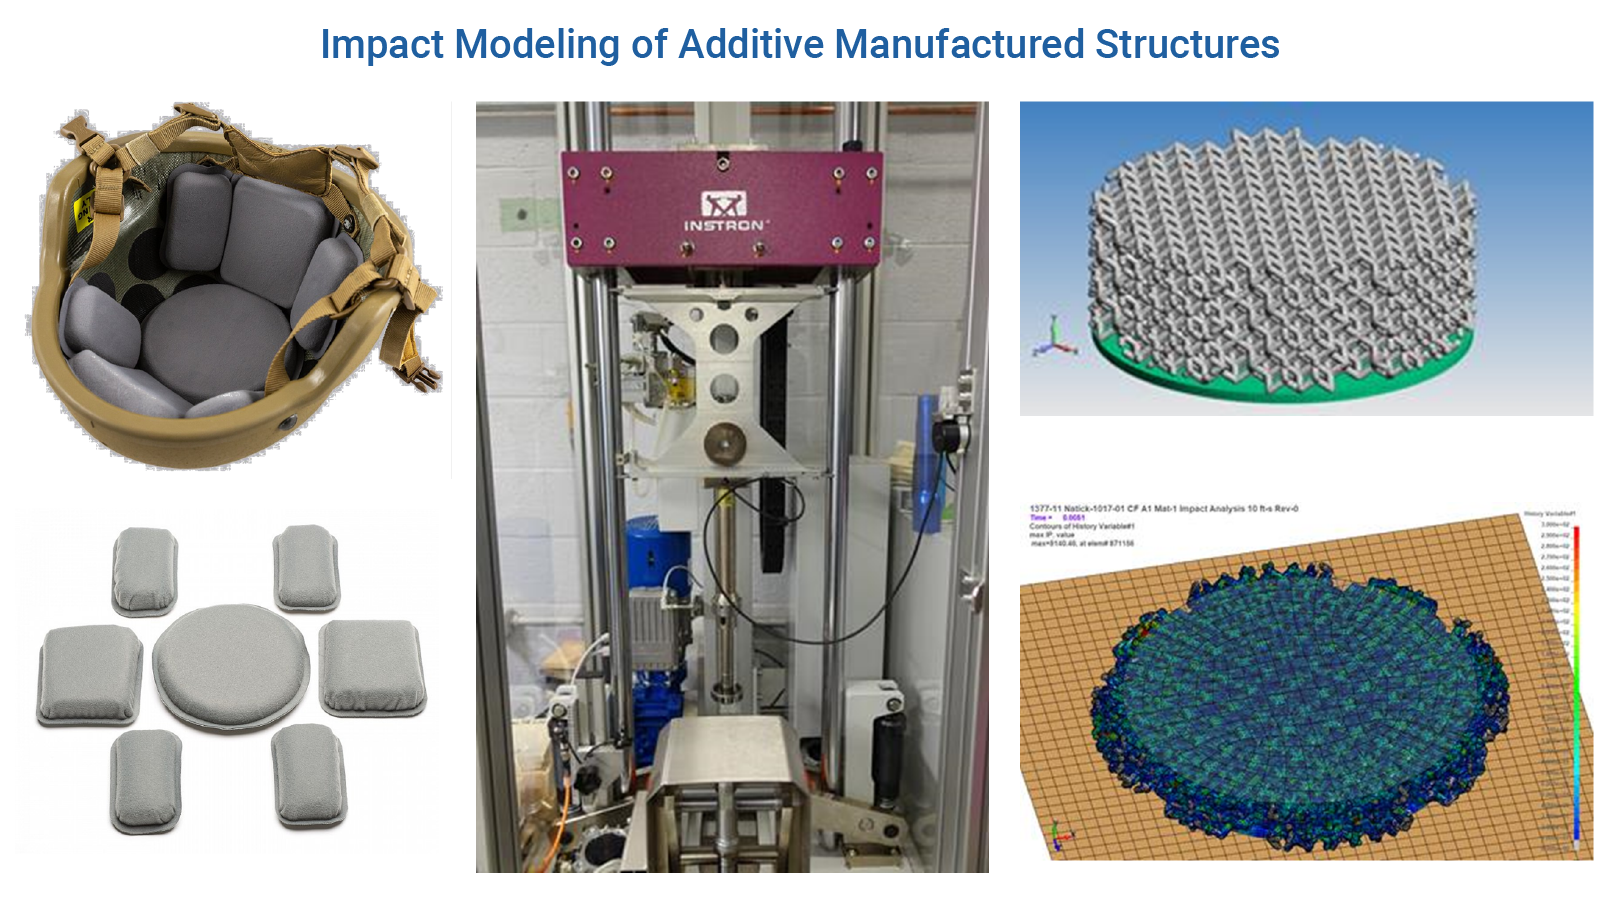 Impact Modeling of Additive Manufactured Structures for Advanced Material Properties - Predictive Engineering Consulting Services